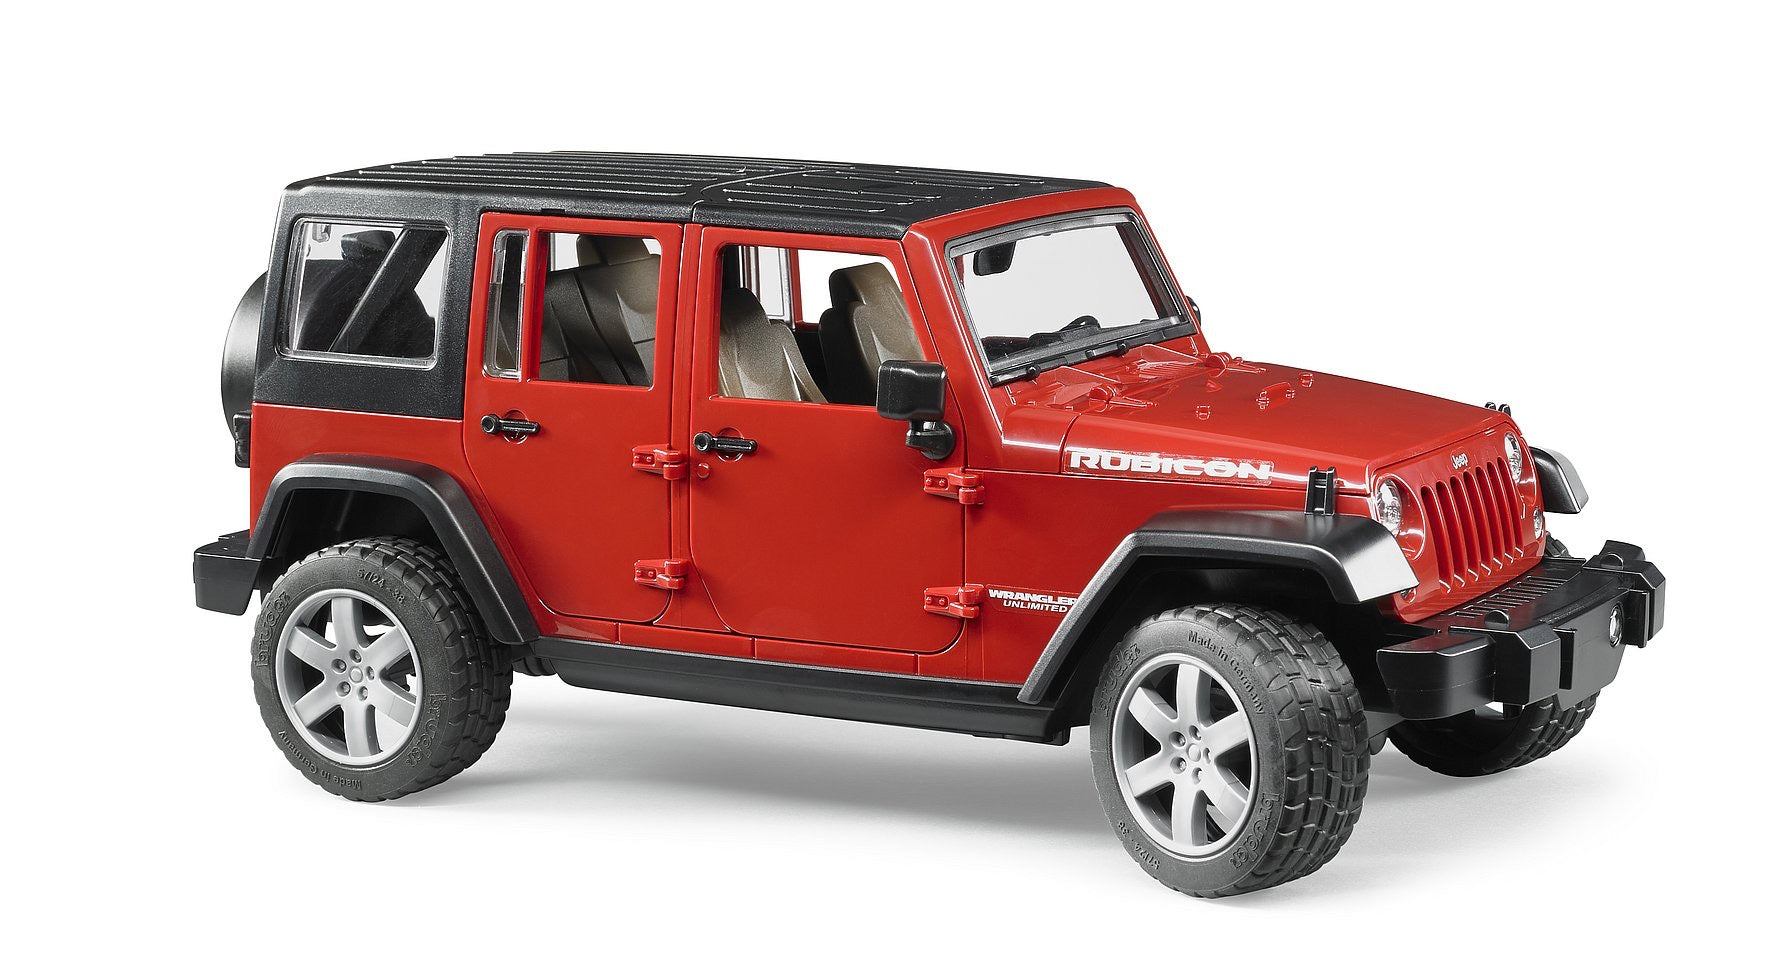 Jeep Wrangler Unlimited Rubicon by Bruder #2525